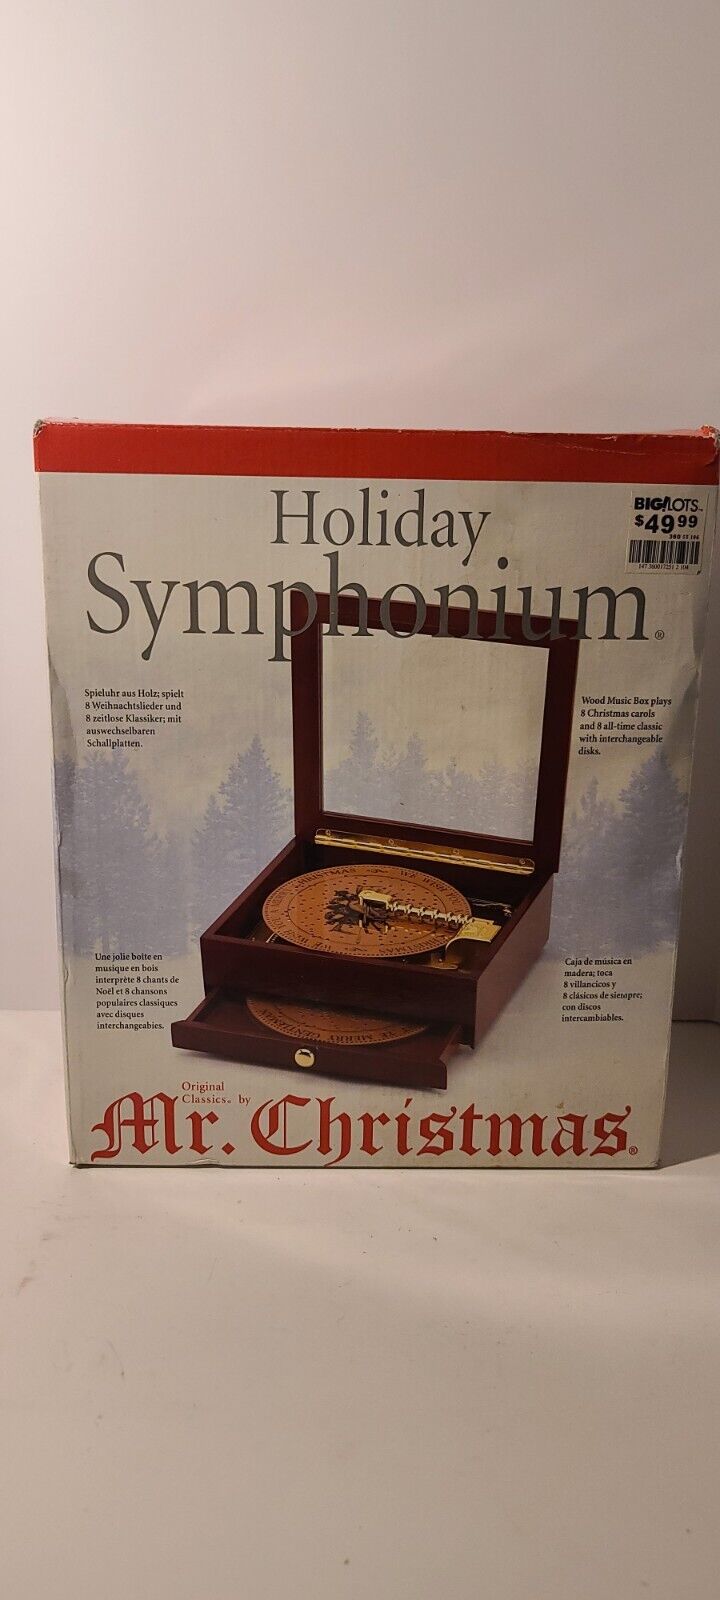 New~Mr. Christmas 2004 Holiday Symphonium Wooden Music Box Interchangeable Disks